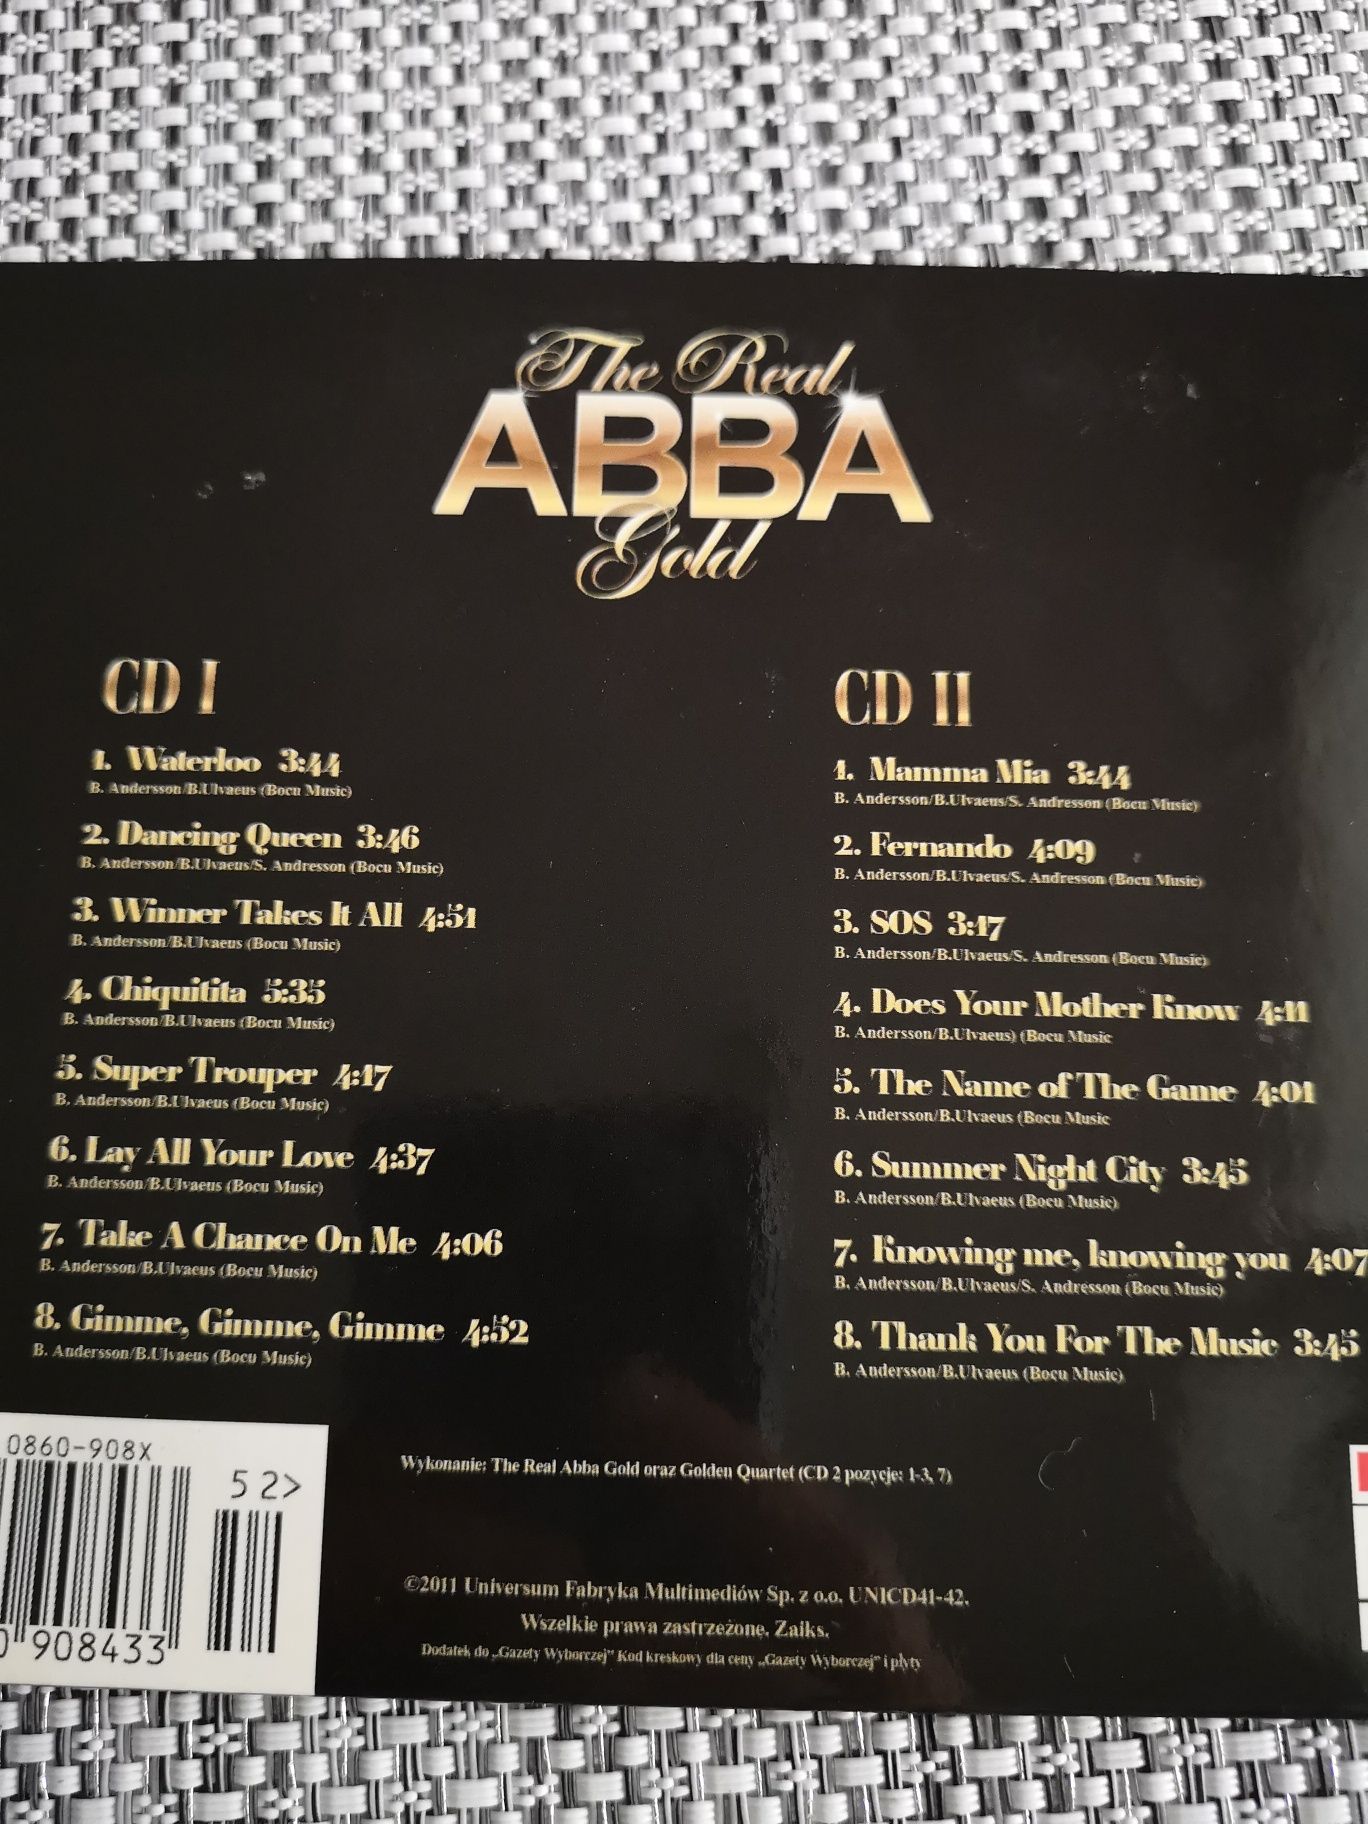 ABBA - The real gold - 2011